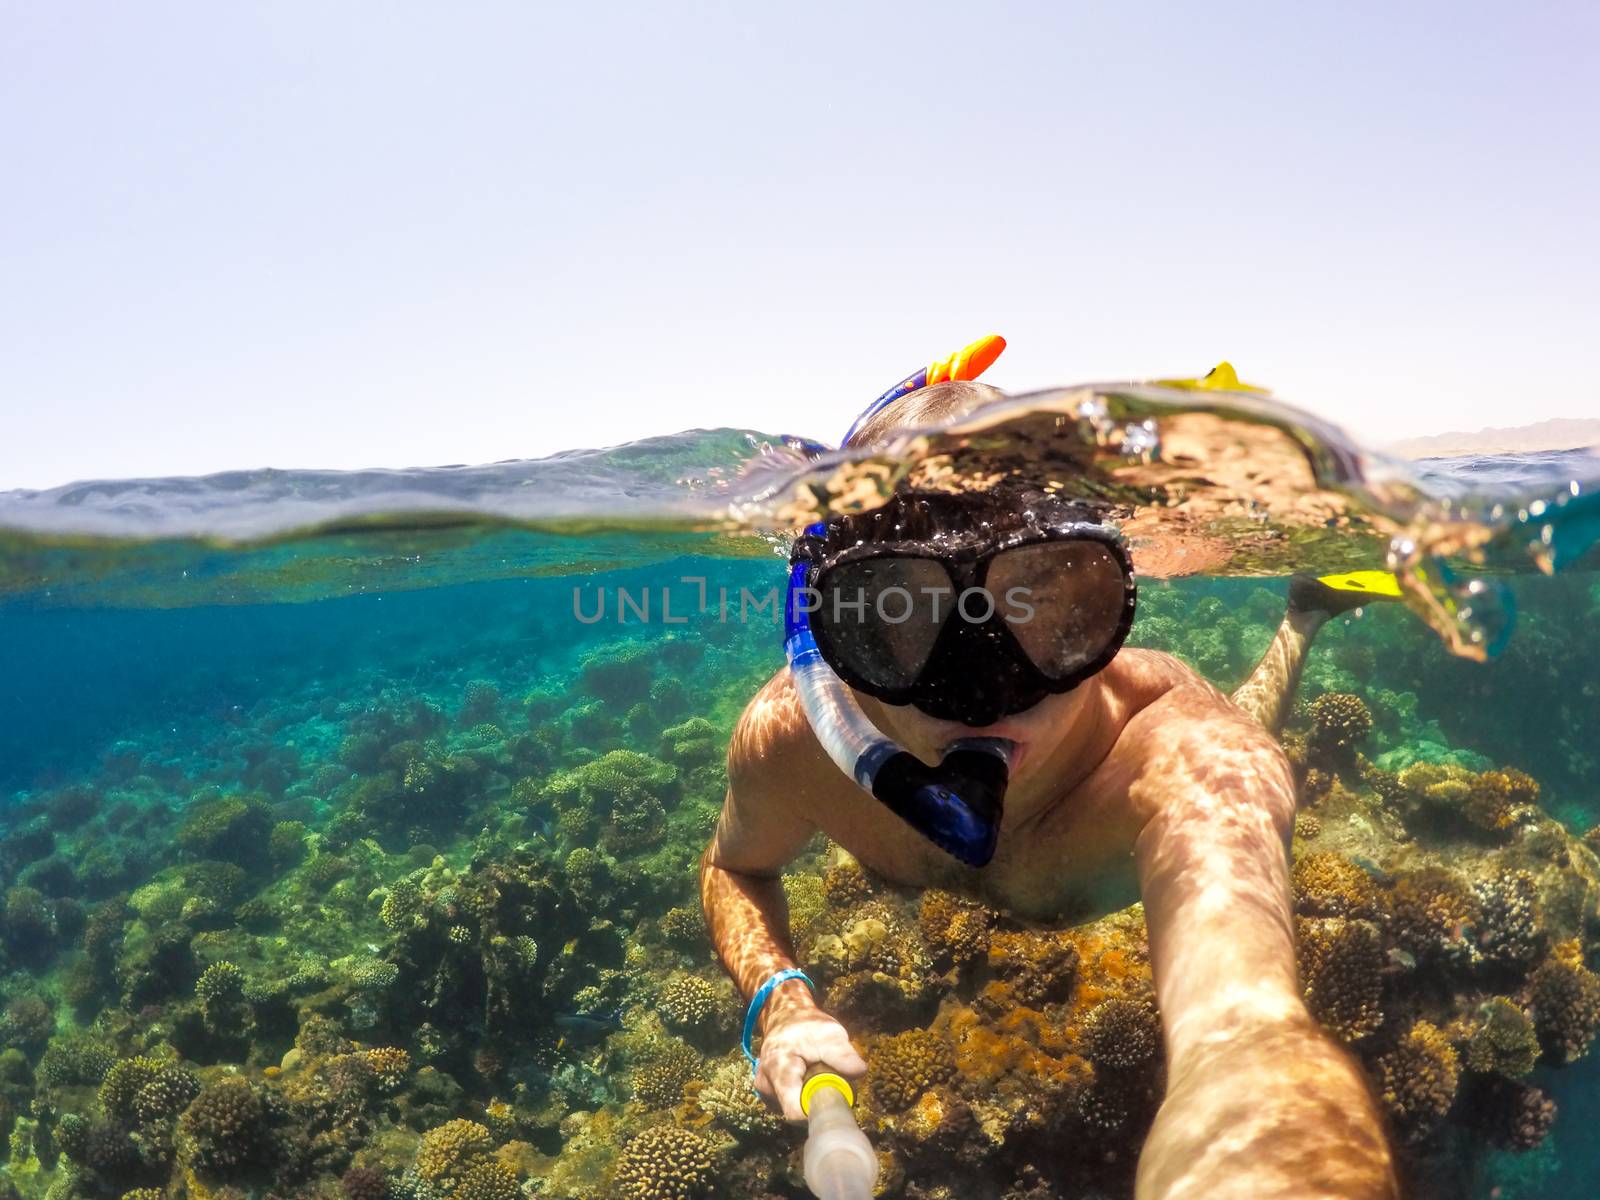 Snorkel swims in shallow water, Red Sea, Egypt by artush